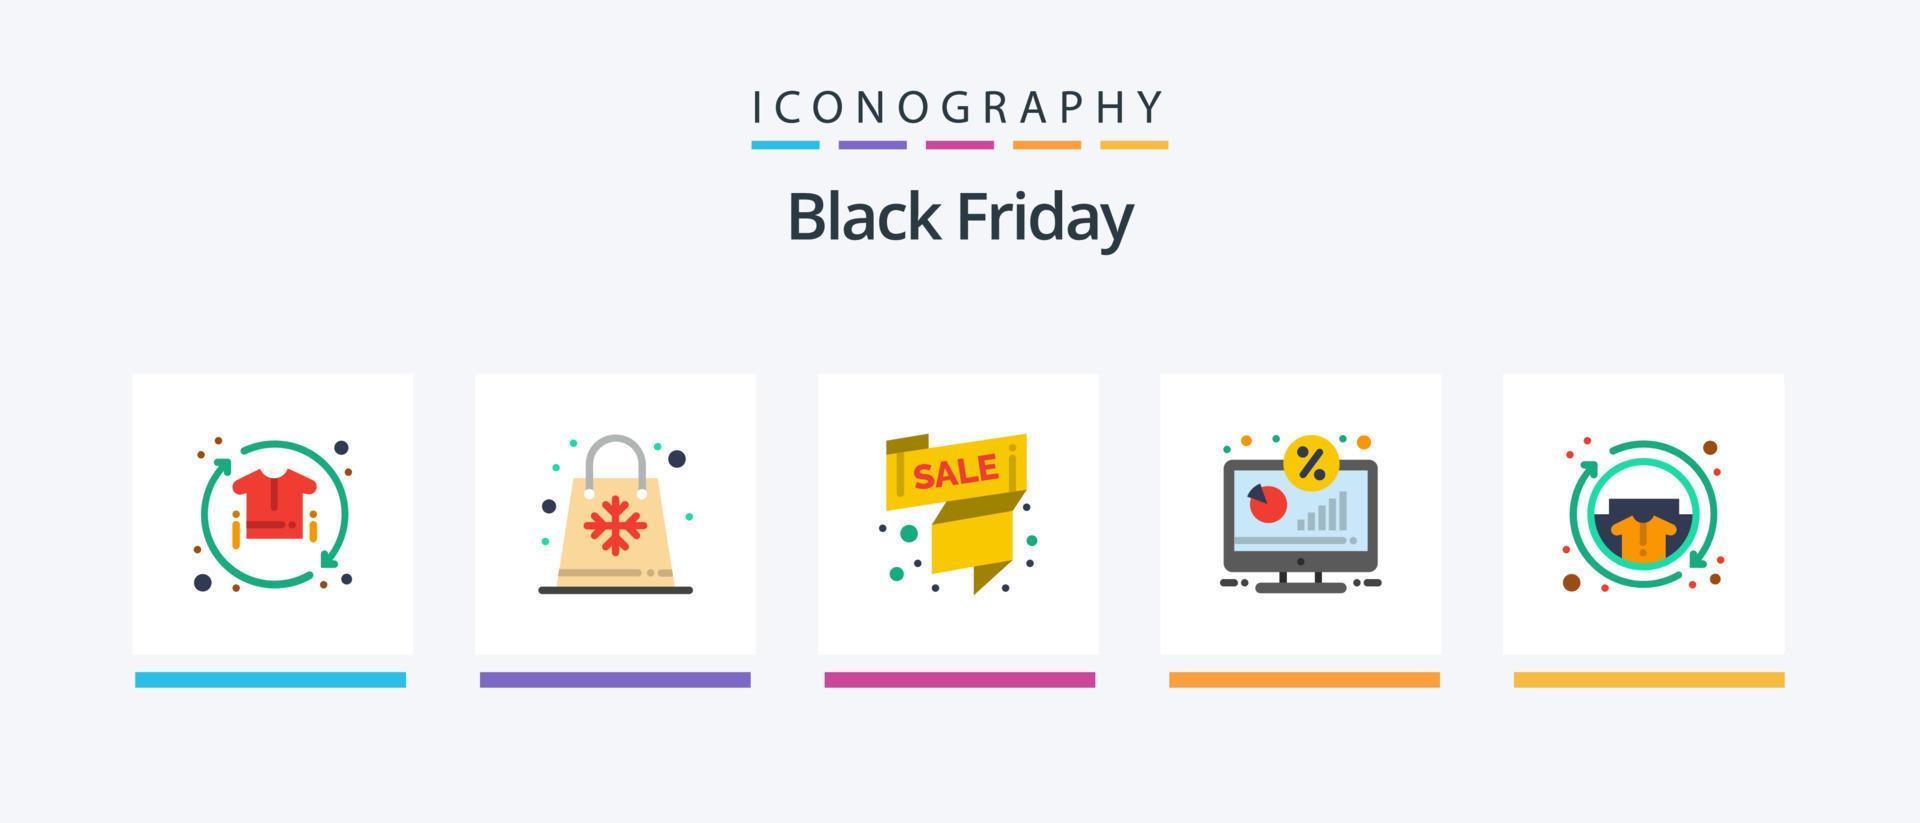 Black Friday Flat 5 Icon Pack Including monitor. discount. seasons. offer. sale label. Creative Icons Design vector